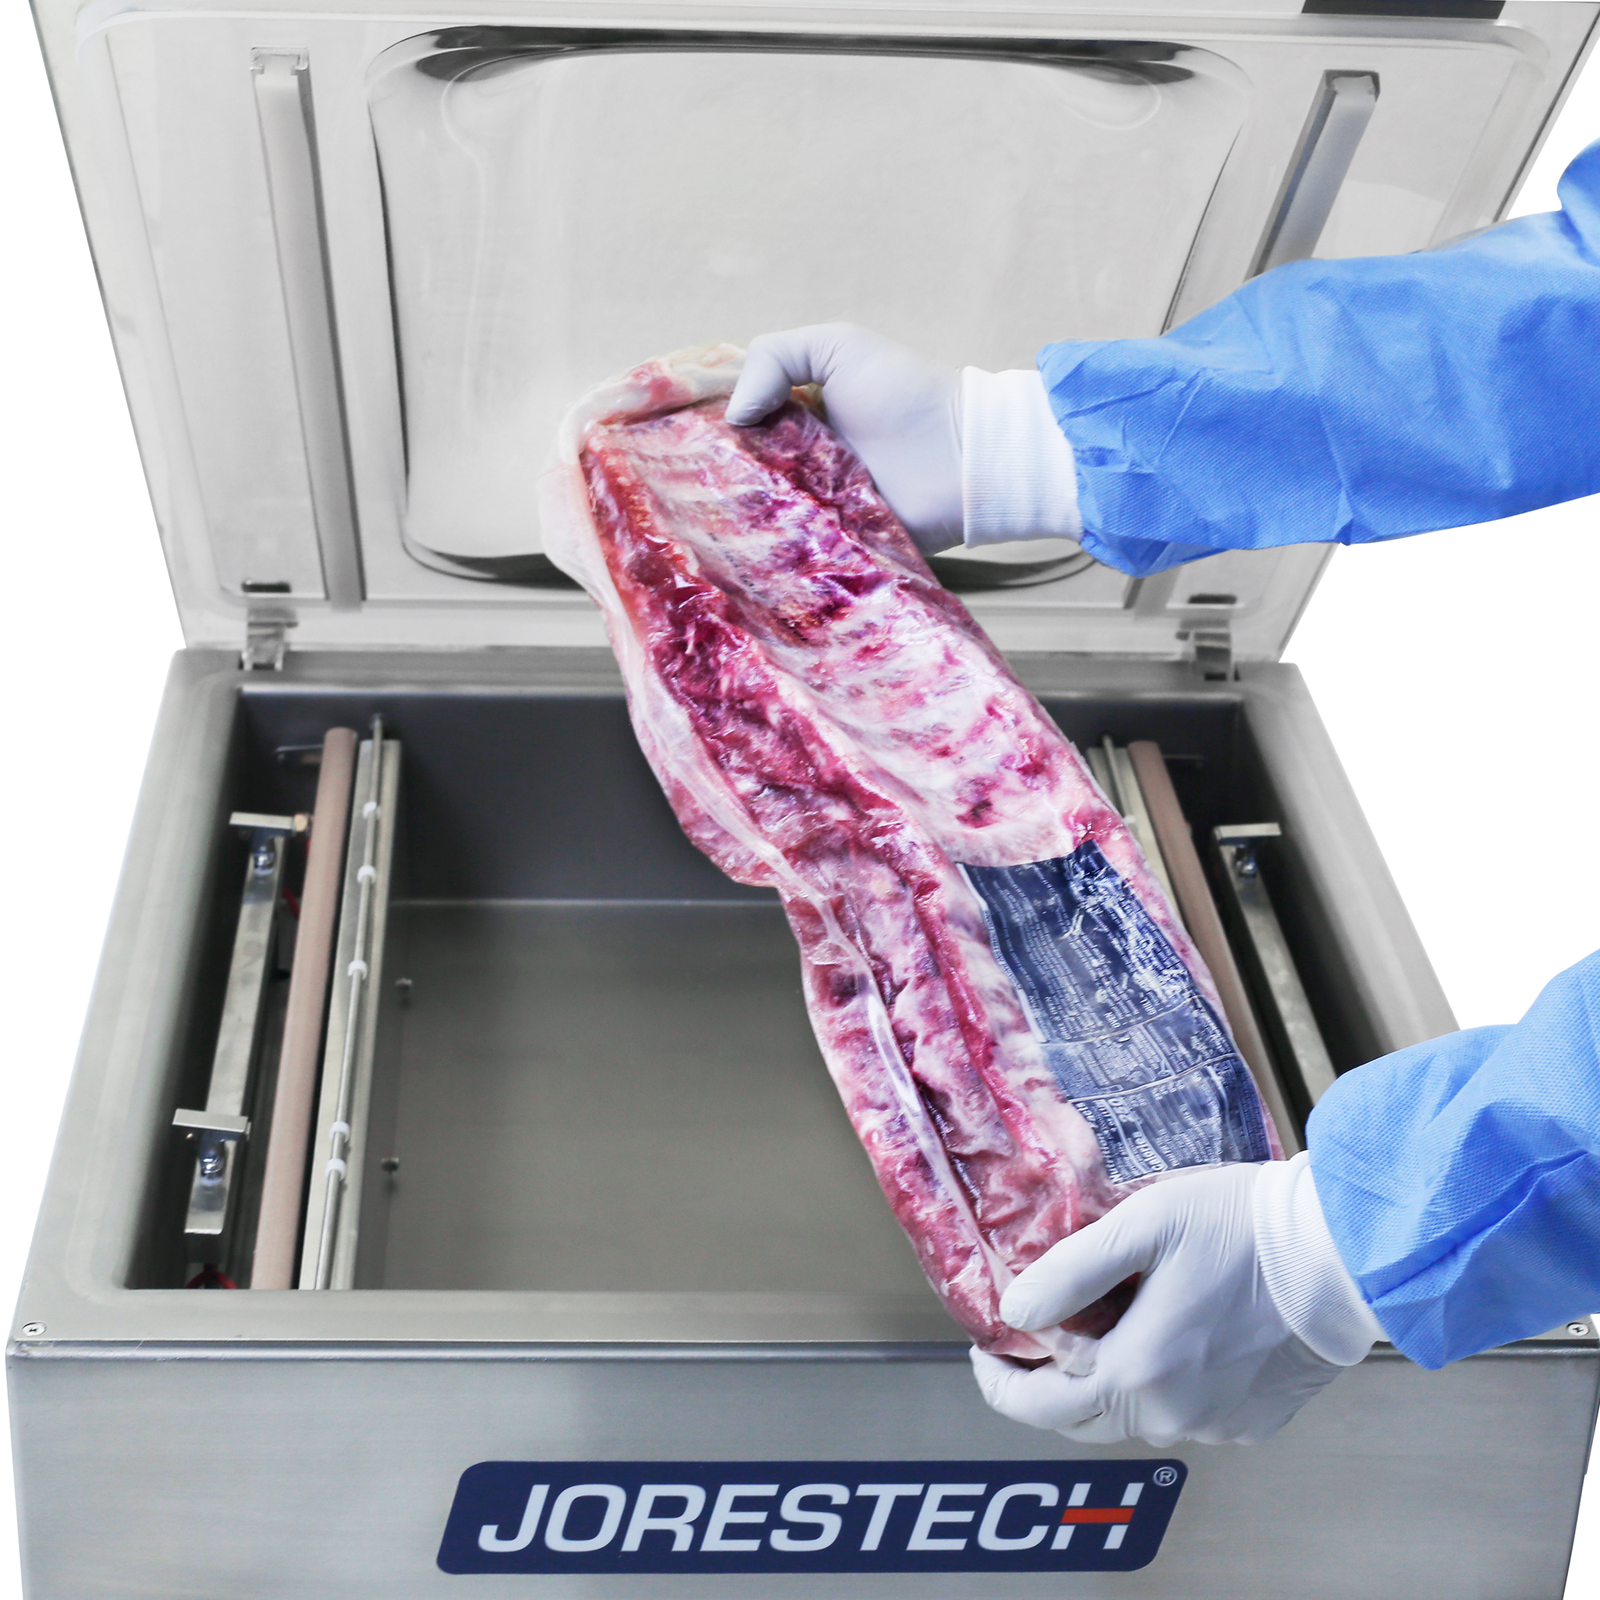 Person wearing disposable gloves and clothing. He is holding a large rack of ribs after been vacuumed by the stainless steel JORES TECHNOLOGIES® tabletop commercial single chamber vacuum sealer with dual seal bar in the background